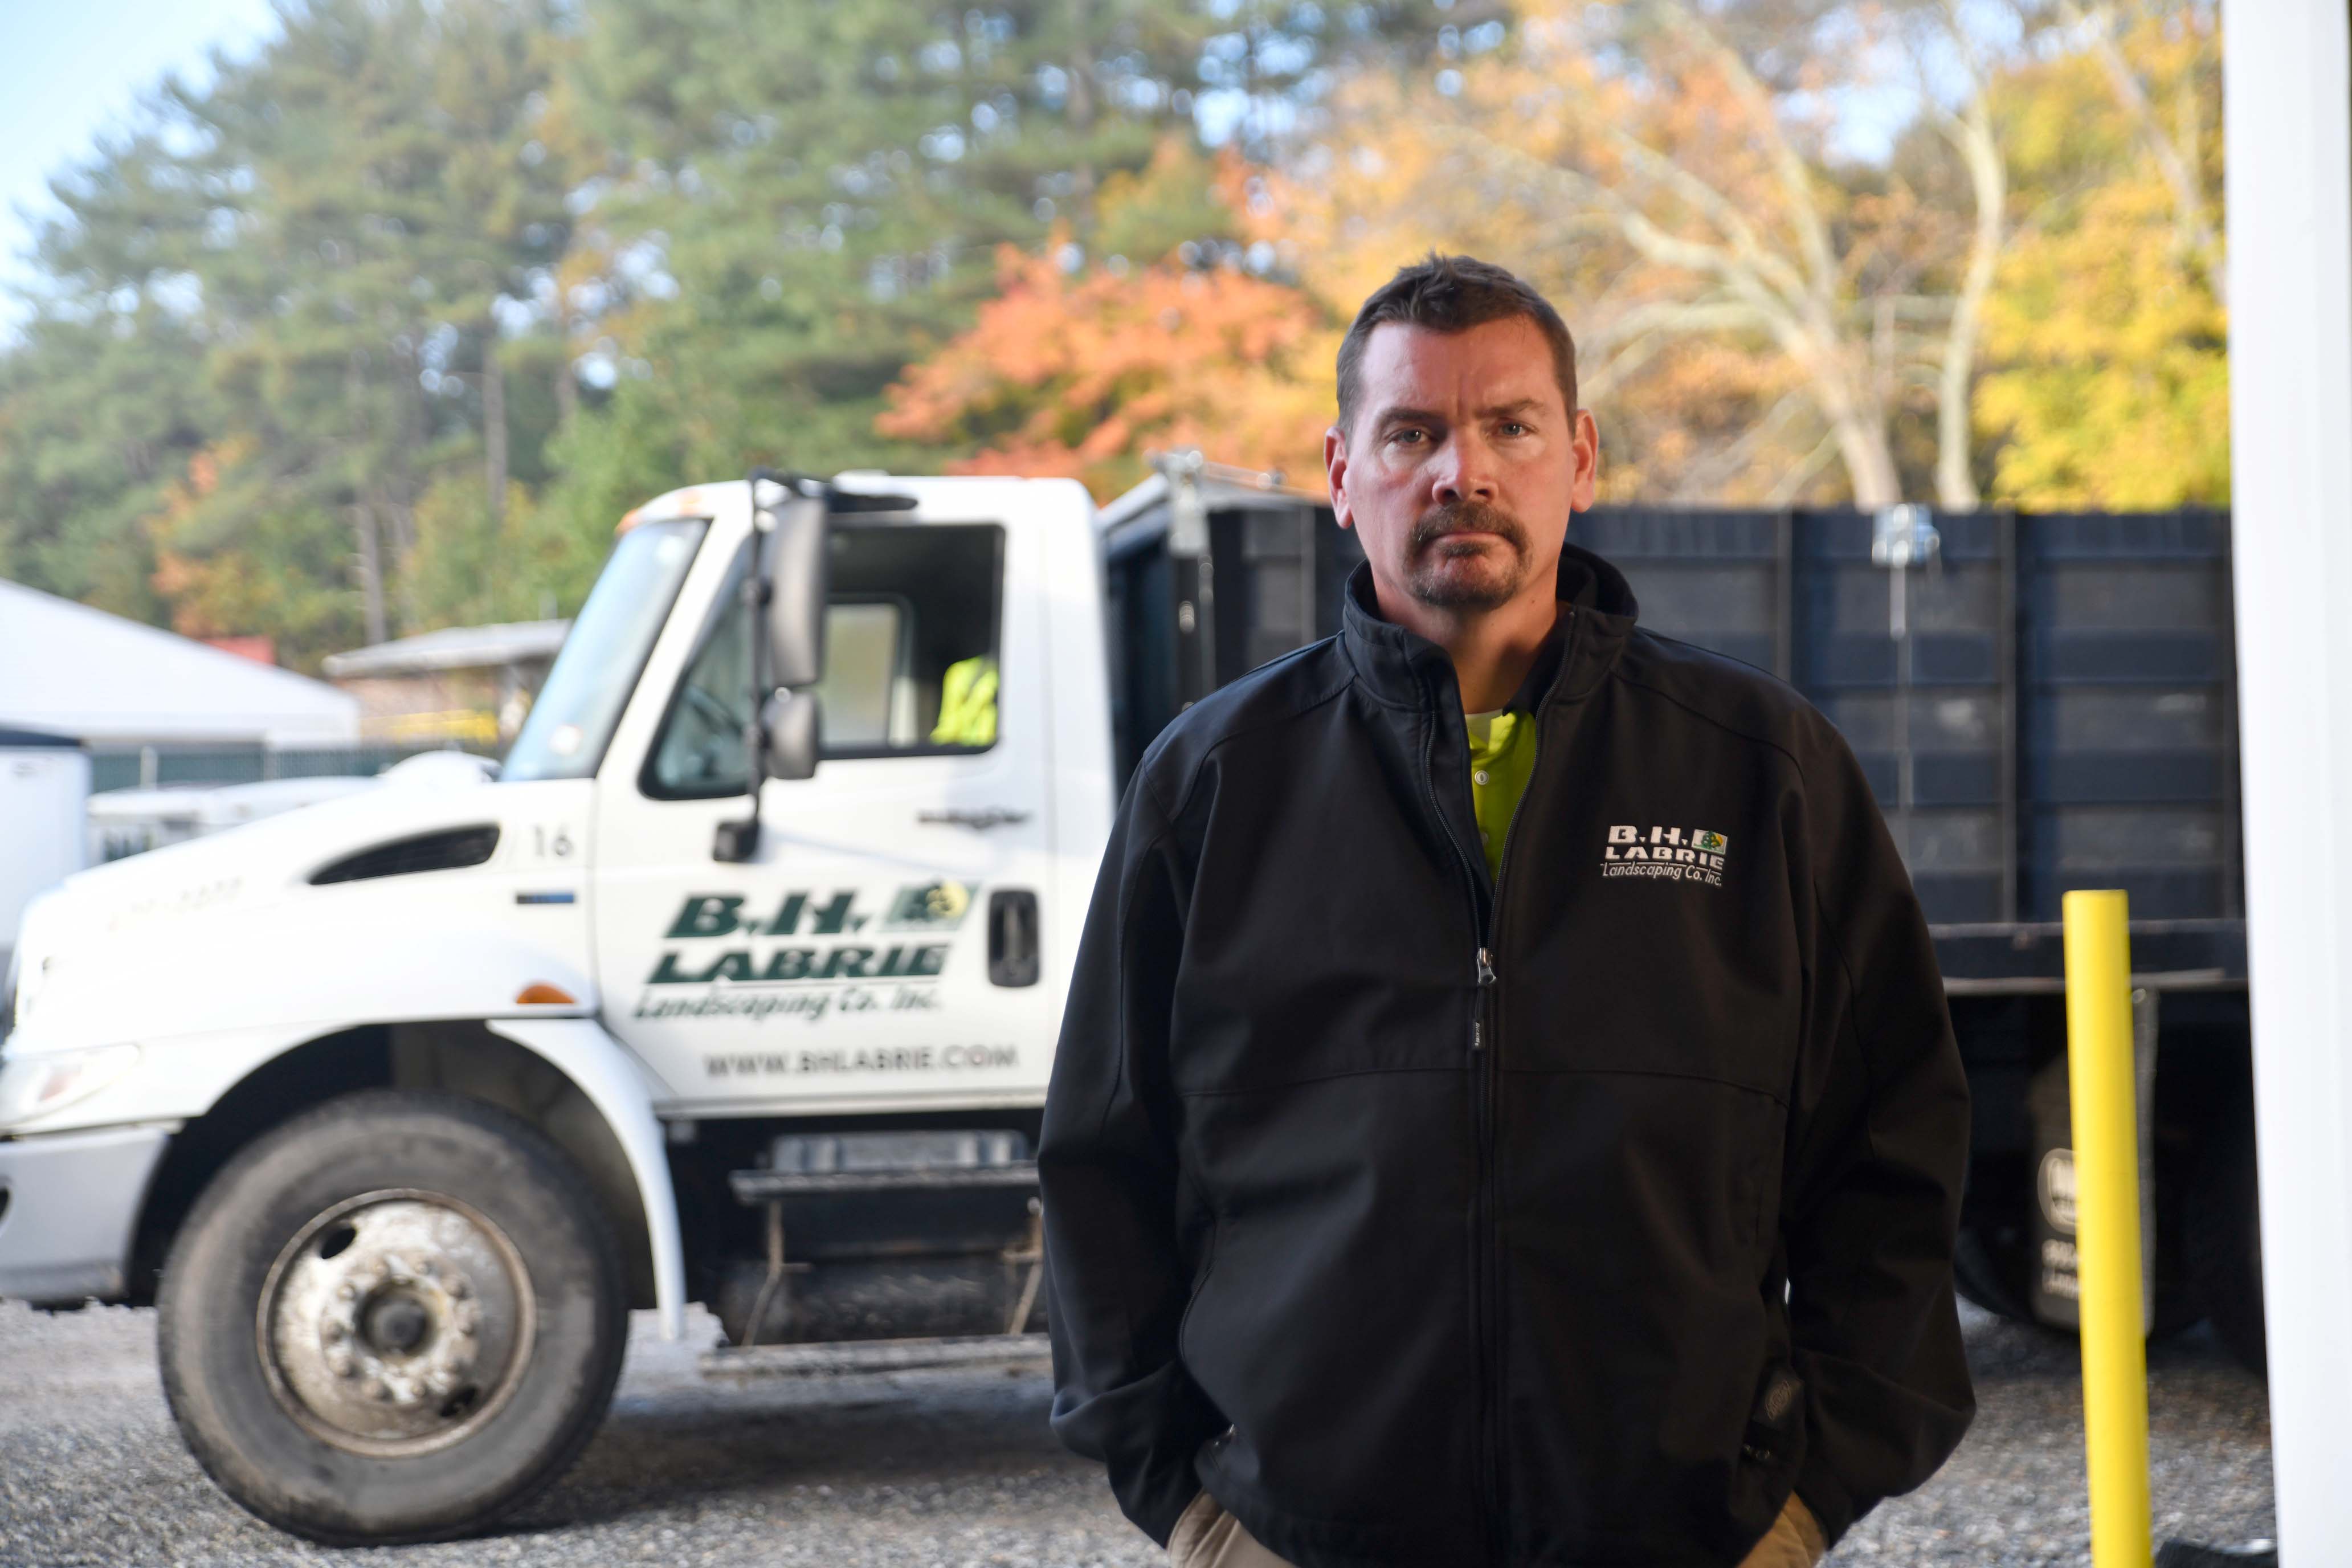 B.H. Labrie Landscaping relies on Sullair air compressors for their fall sprinkler blow outs.